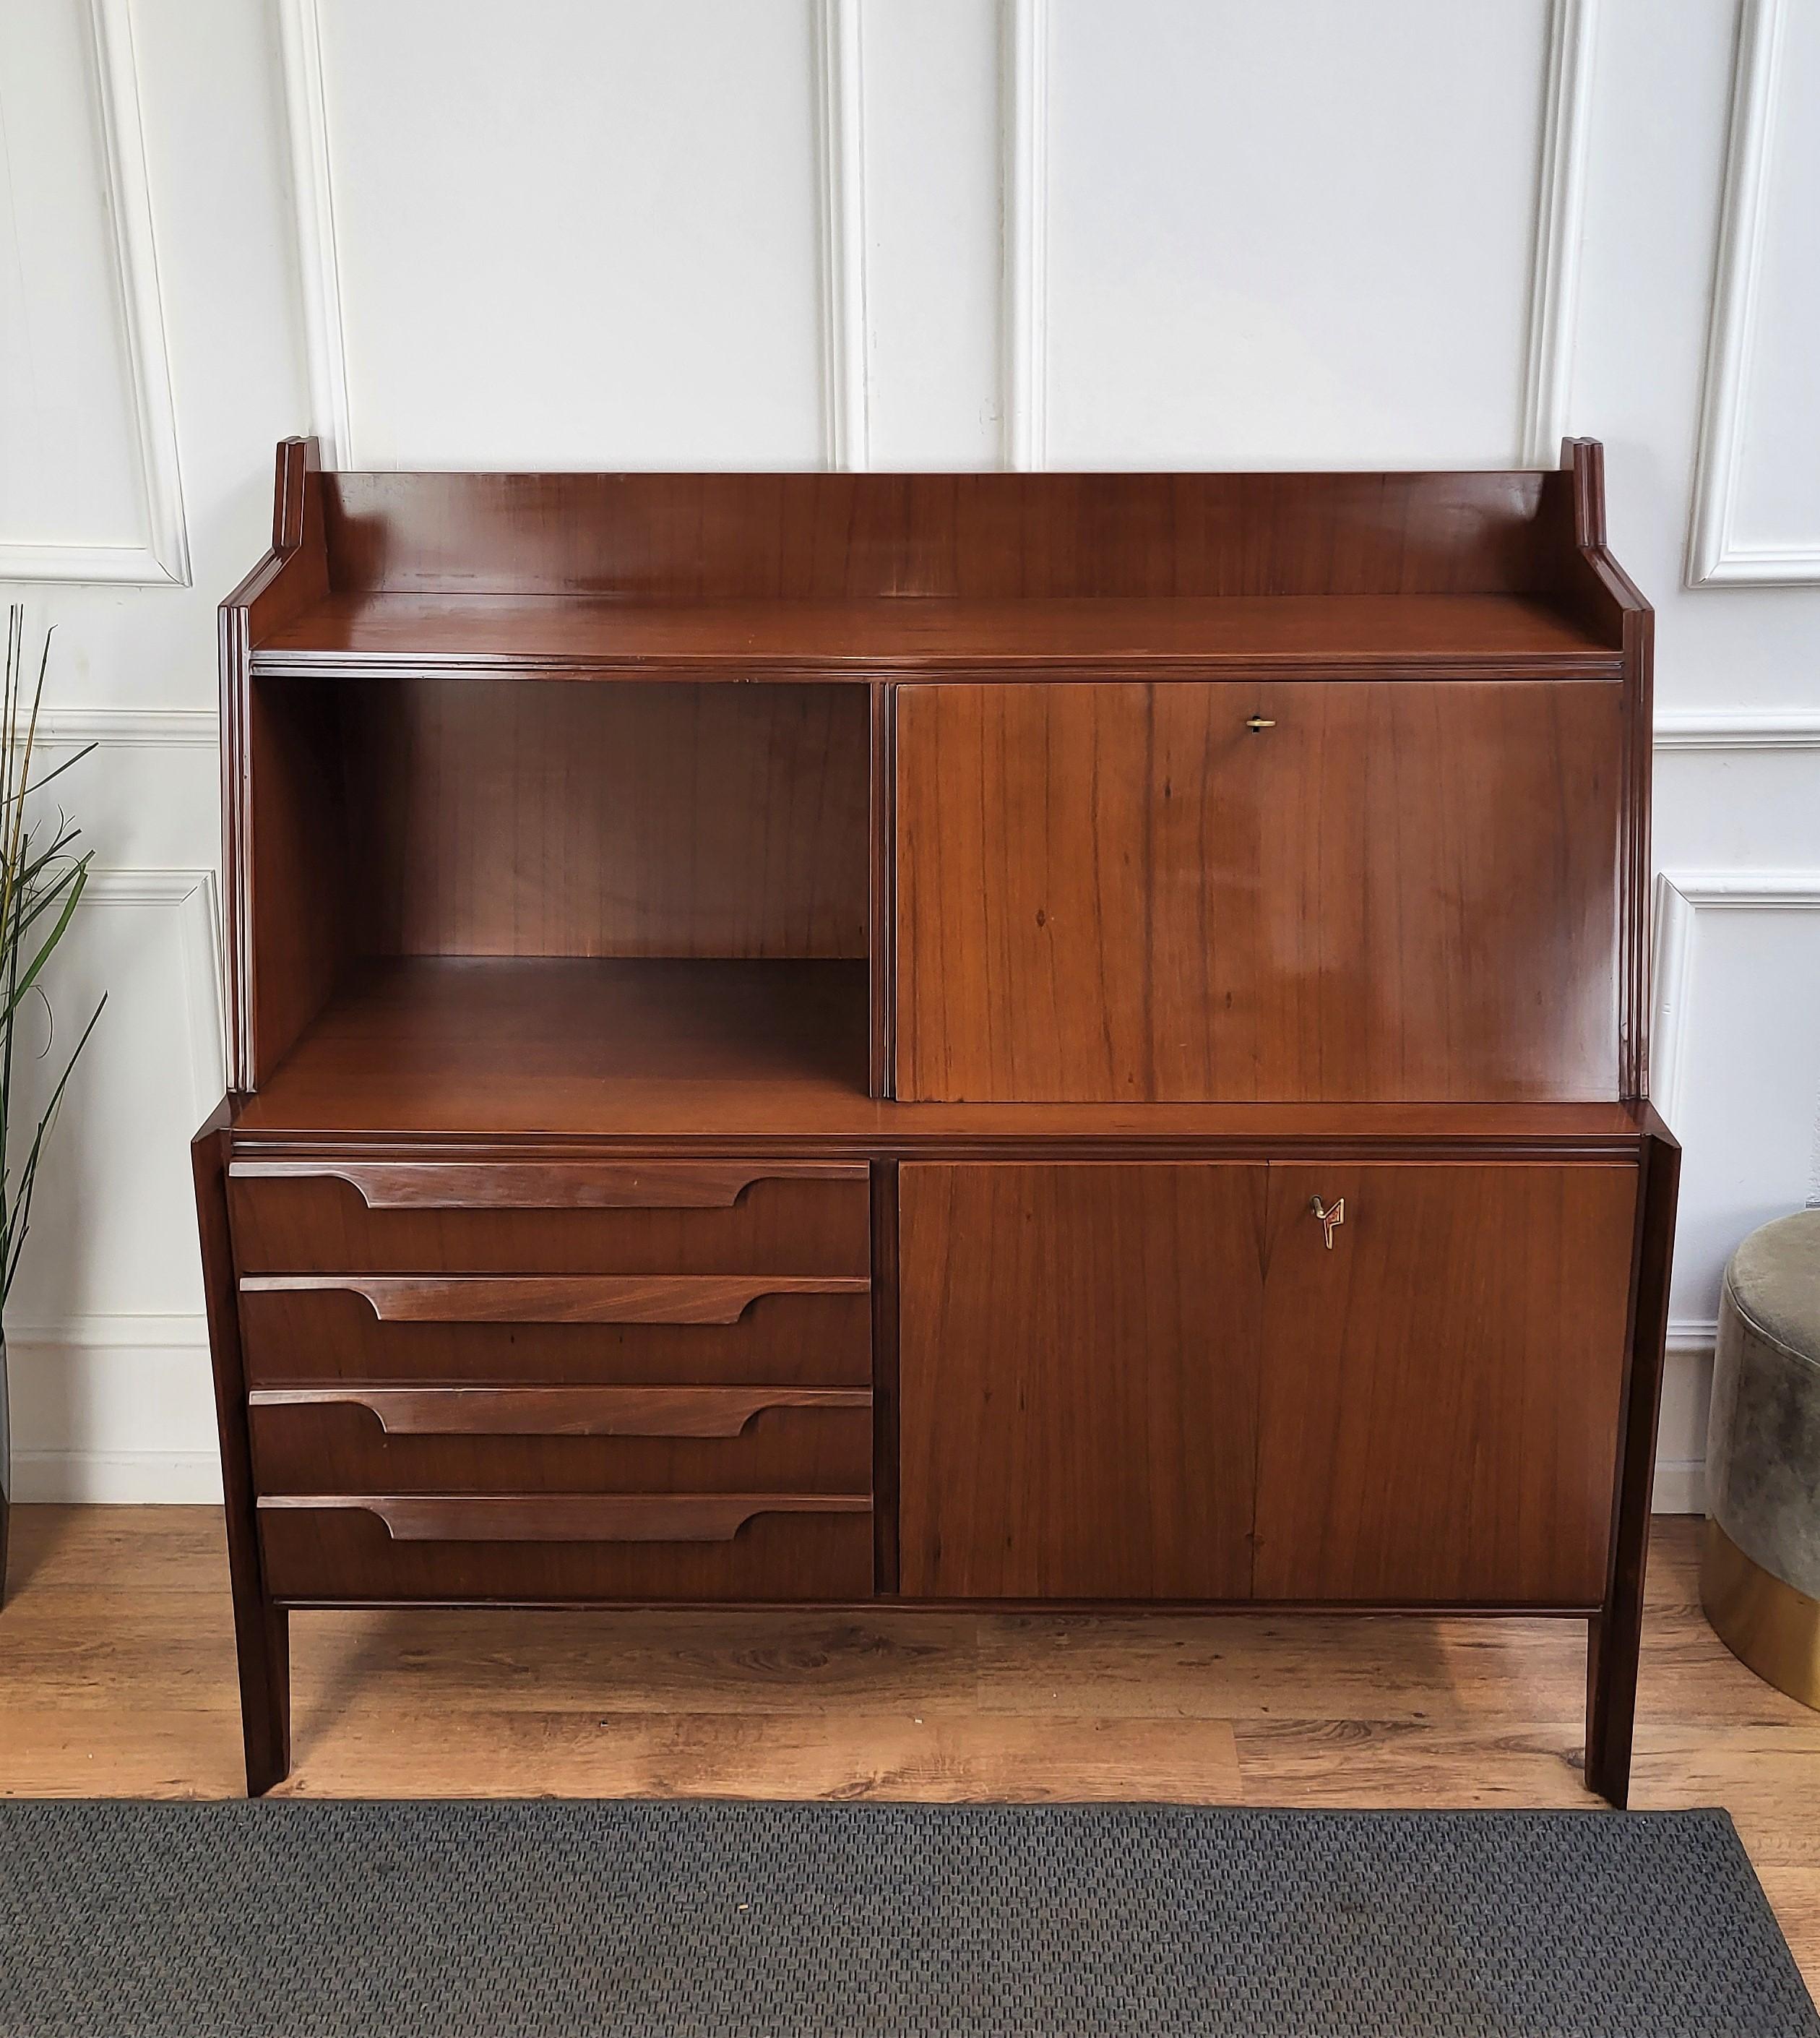 Important and elegantly shaped Italian Art Deco Mid-Century Modern sideboard or credenza. With its greatly designed edges, frames and details in beautiful wood, the credenza has an upper shelf, a drop-flip central opening and in the down part two